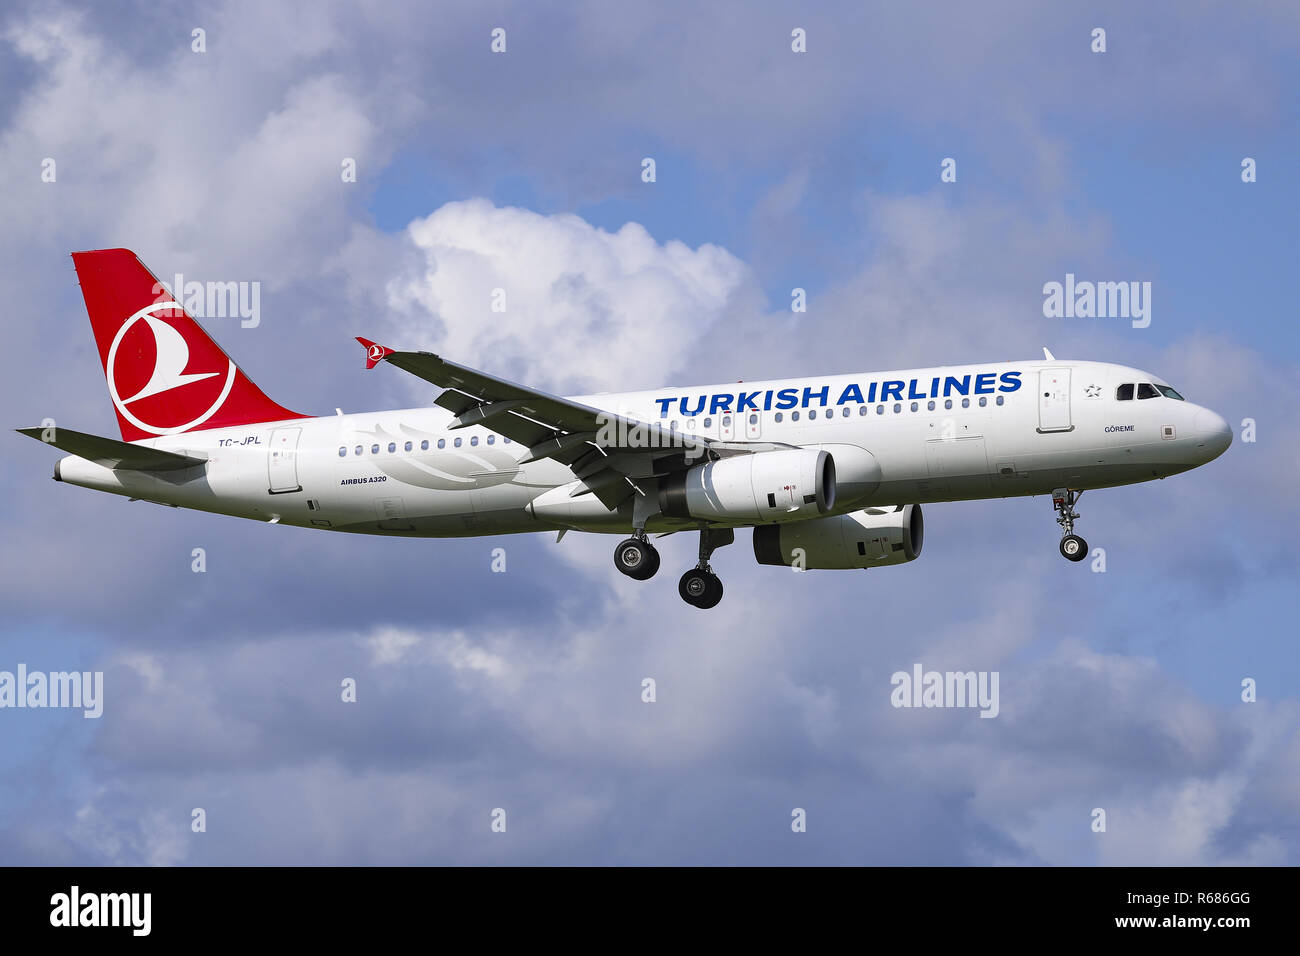 Netherlands. 30th Aug, 2018. Turkish Airlines Airbus A320-200 seen landing at the Amsterdam Schiphol International Airport in the Netherlands during a sunny day. The aircraft is an Airbus A320-232, equipped with two V2500 engines, with registration TC-JPL and airplane name Goreme. Turkish Airlines TK connects Amsterdam AMS/EHAM to Istanbul AtatÃ¼rk IST/LTBA airport and Istanbul Sabiha GÃ¶kçen SAW/LTFJ in Turkey. Credit: Nicolas Economou/SOPA Images/ZUMA Wire/Alamy Live News Stock Photo